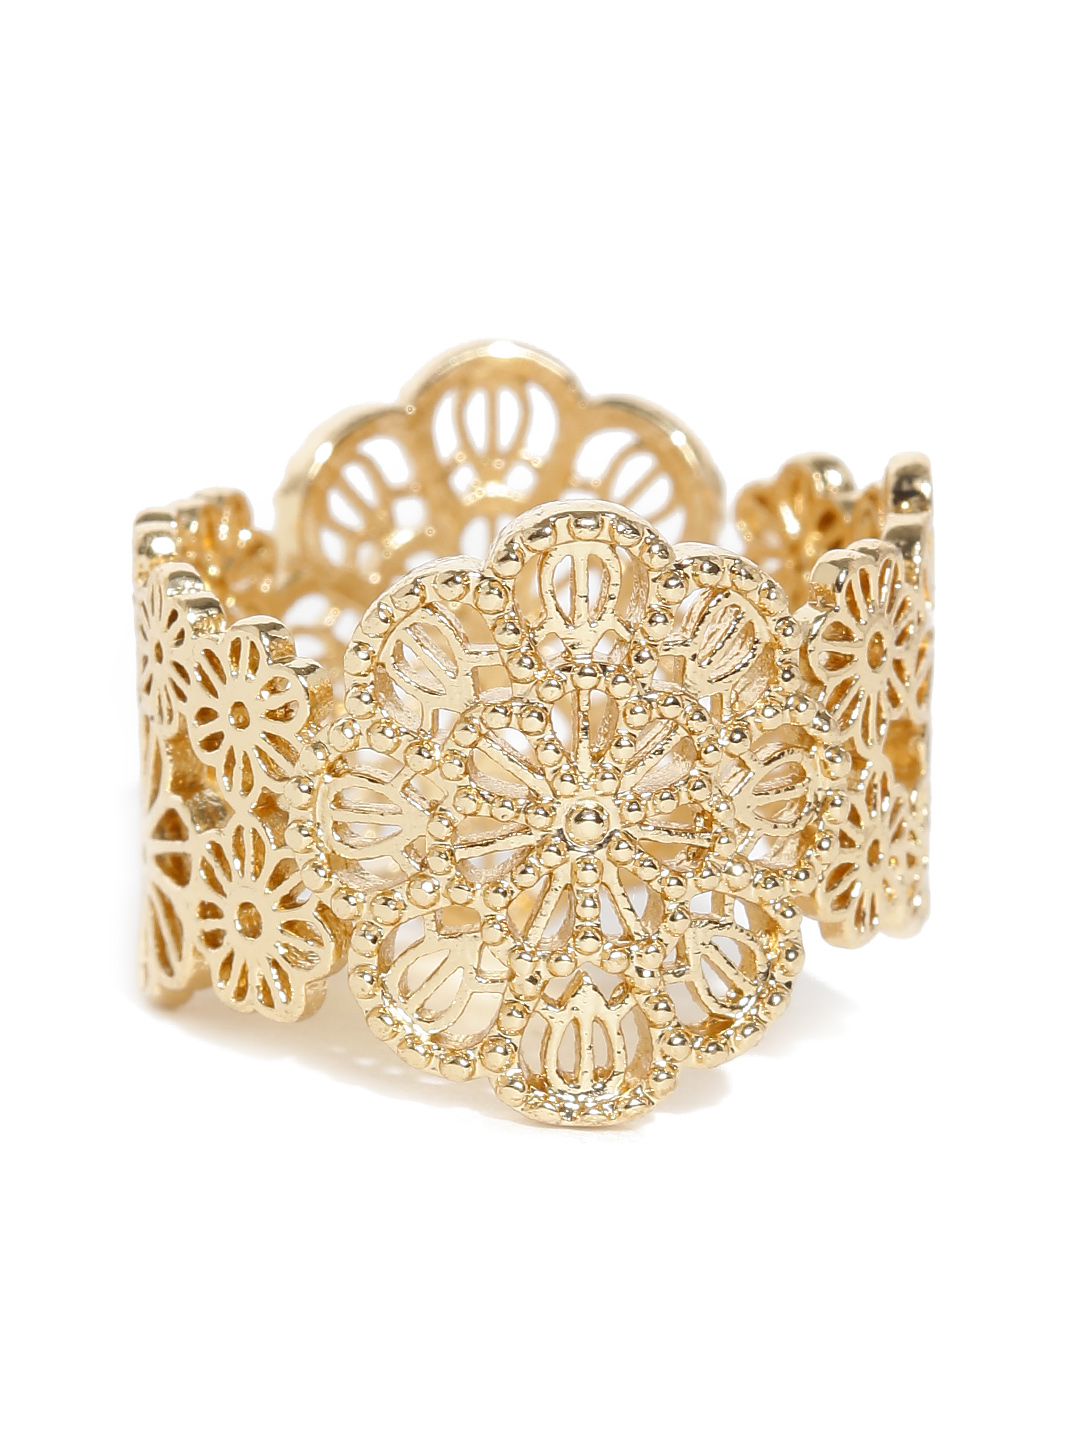 Accesorize Gold-Toned Ring